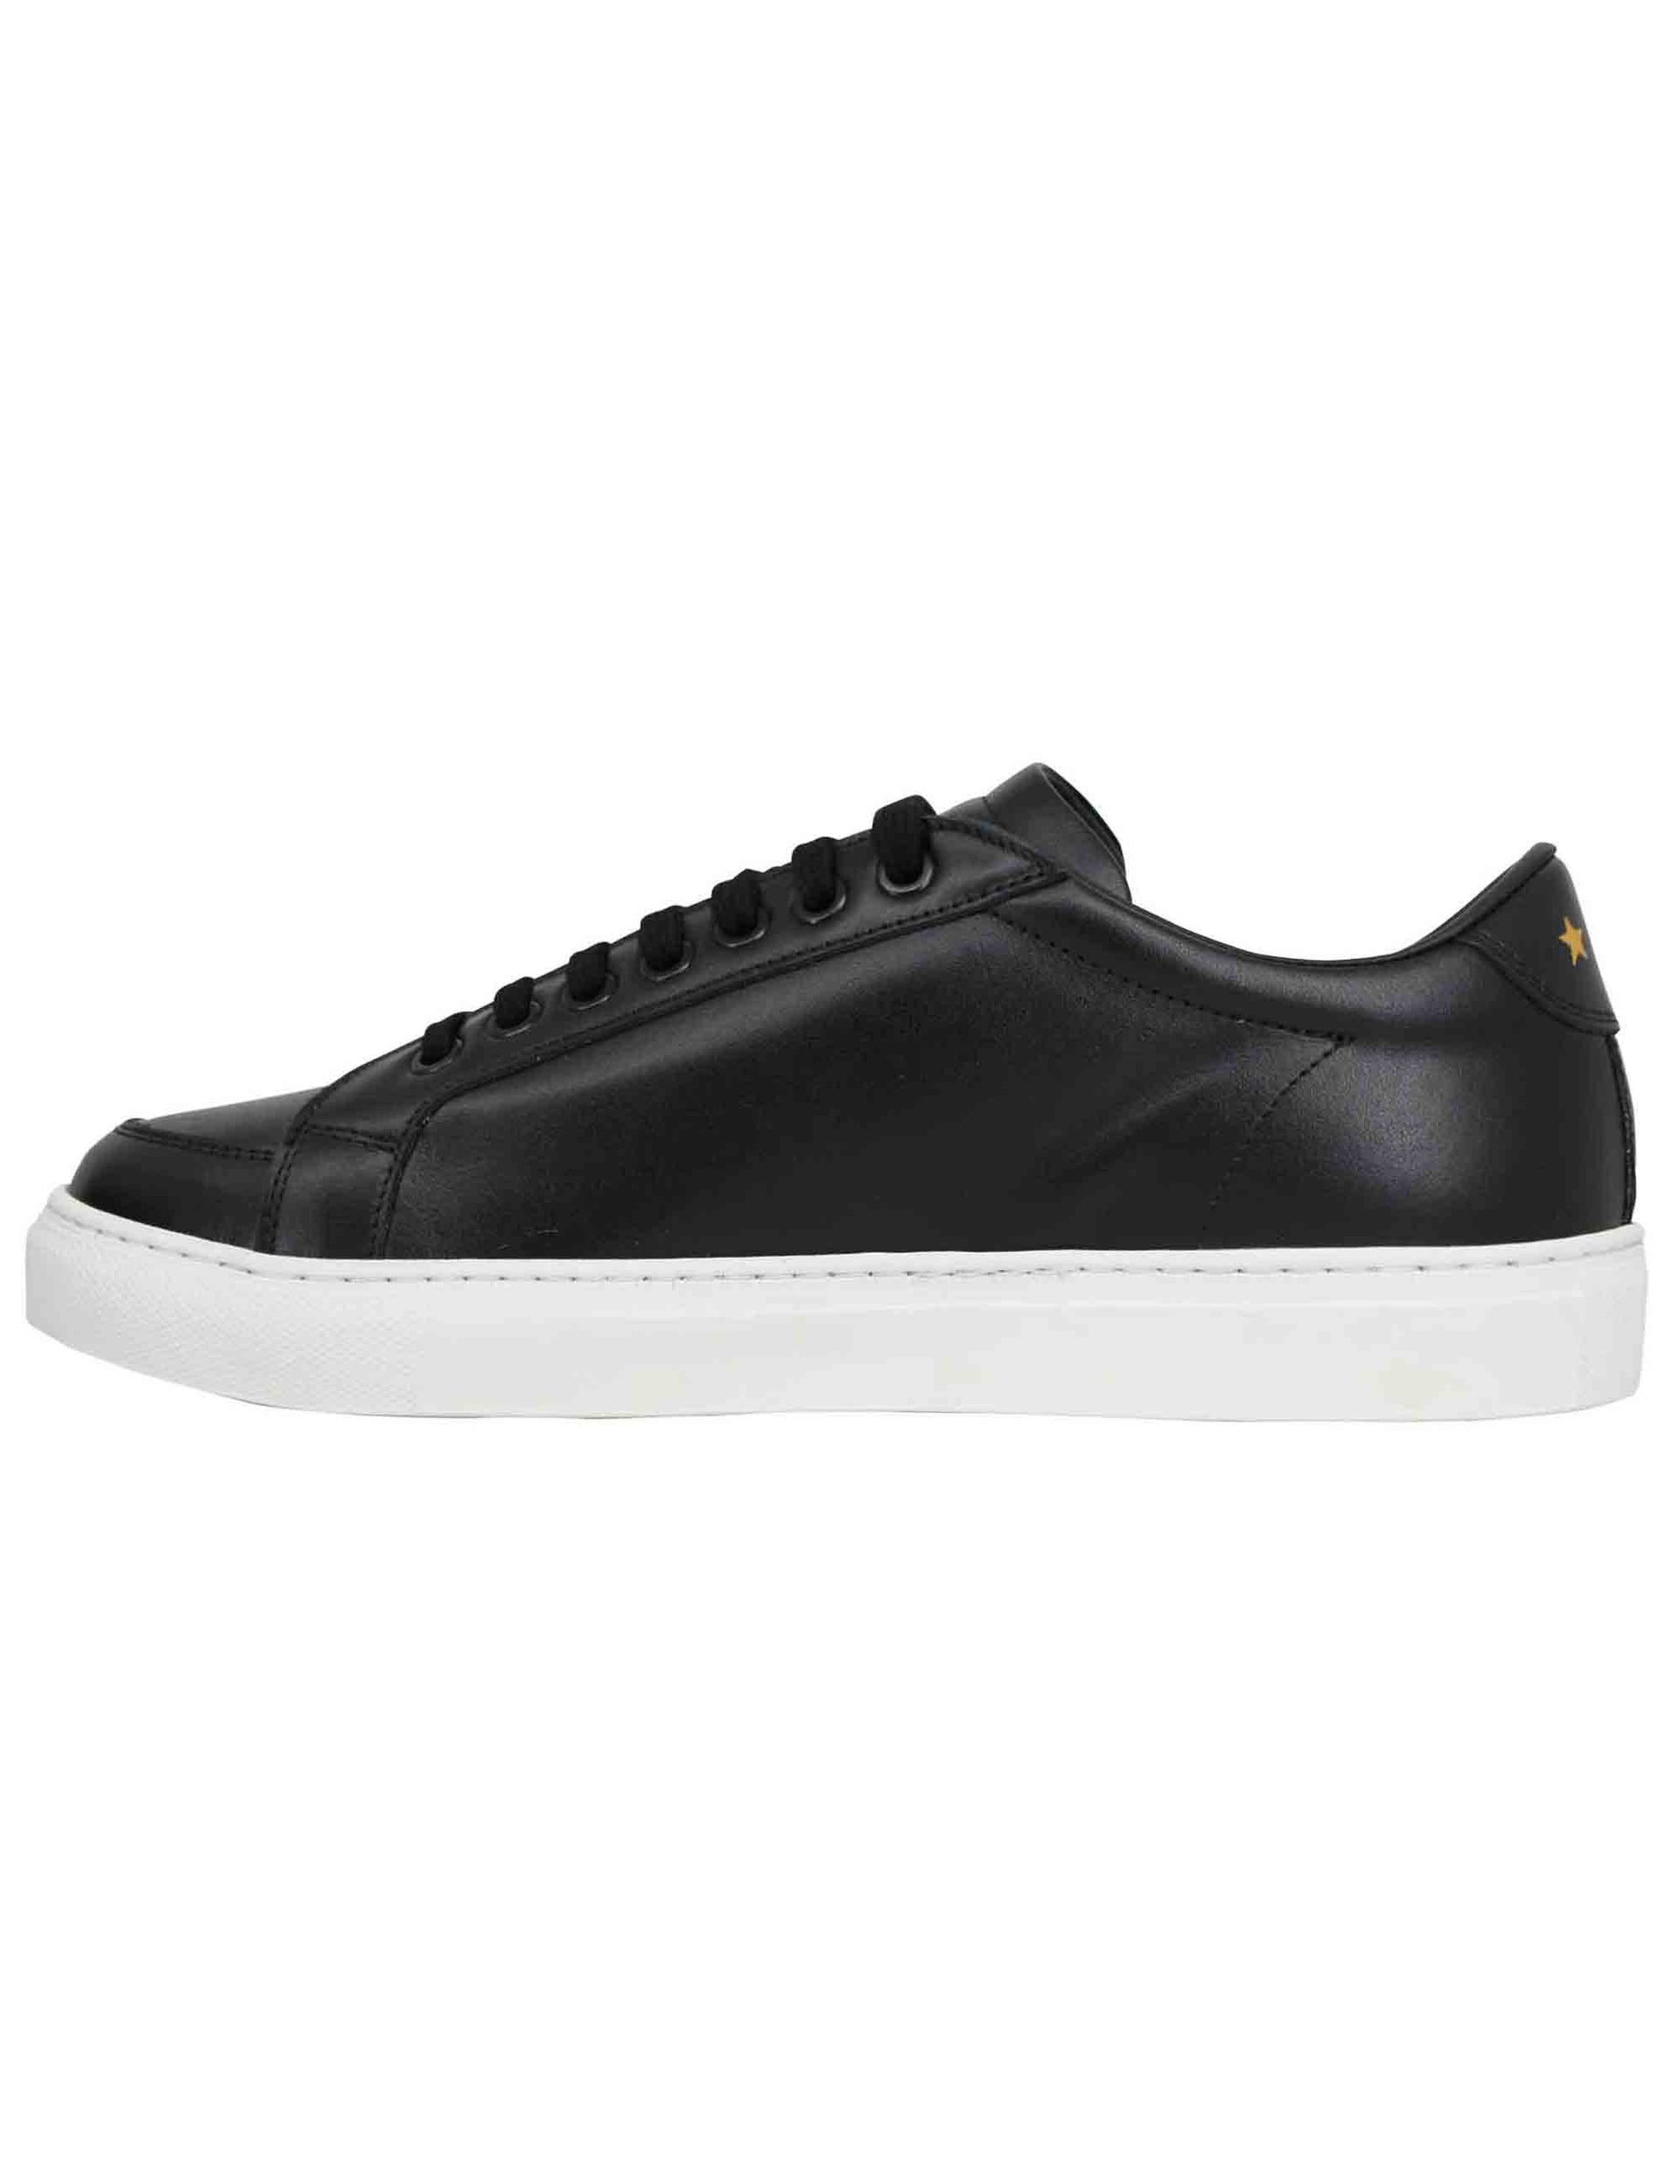 Top spin men's sneakers in black leather